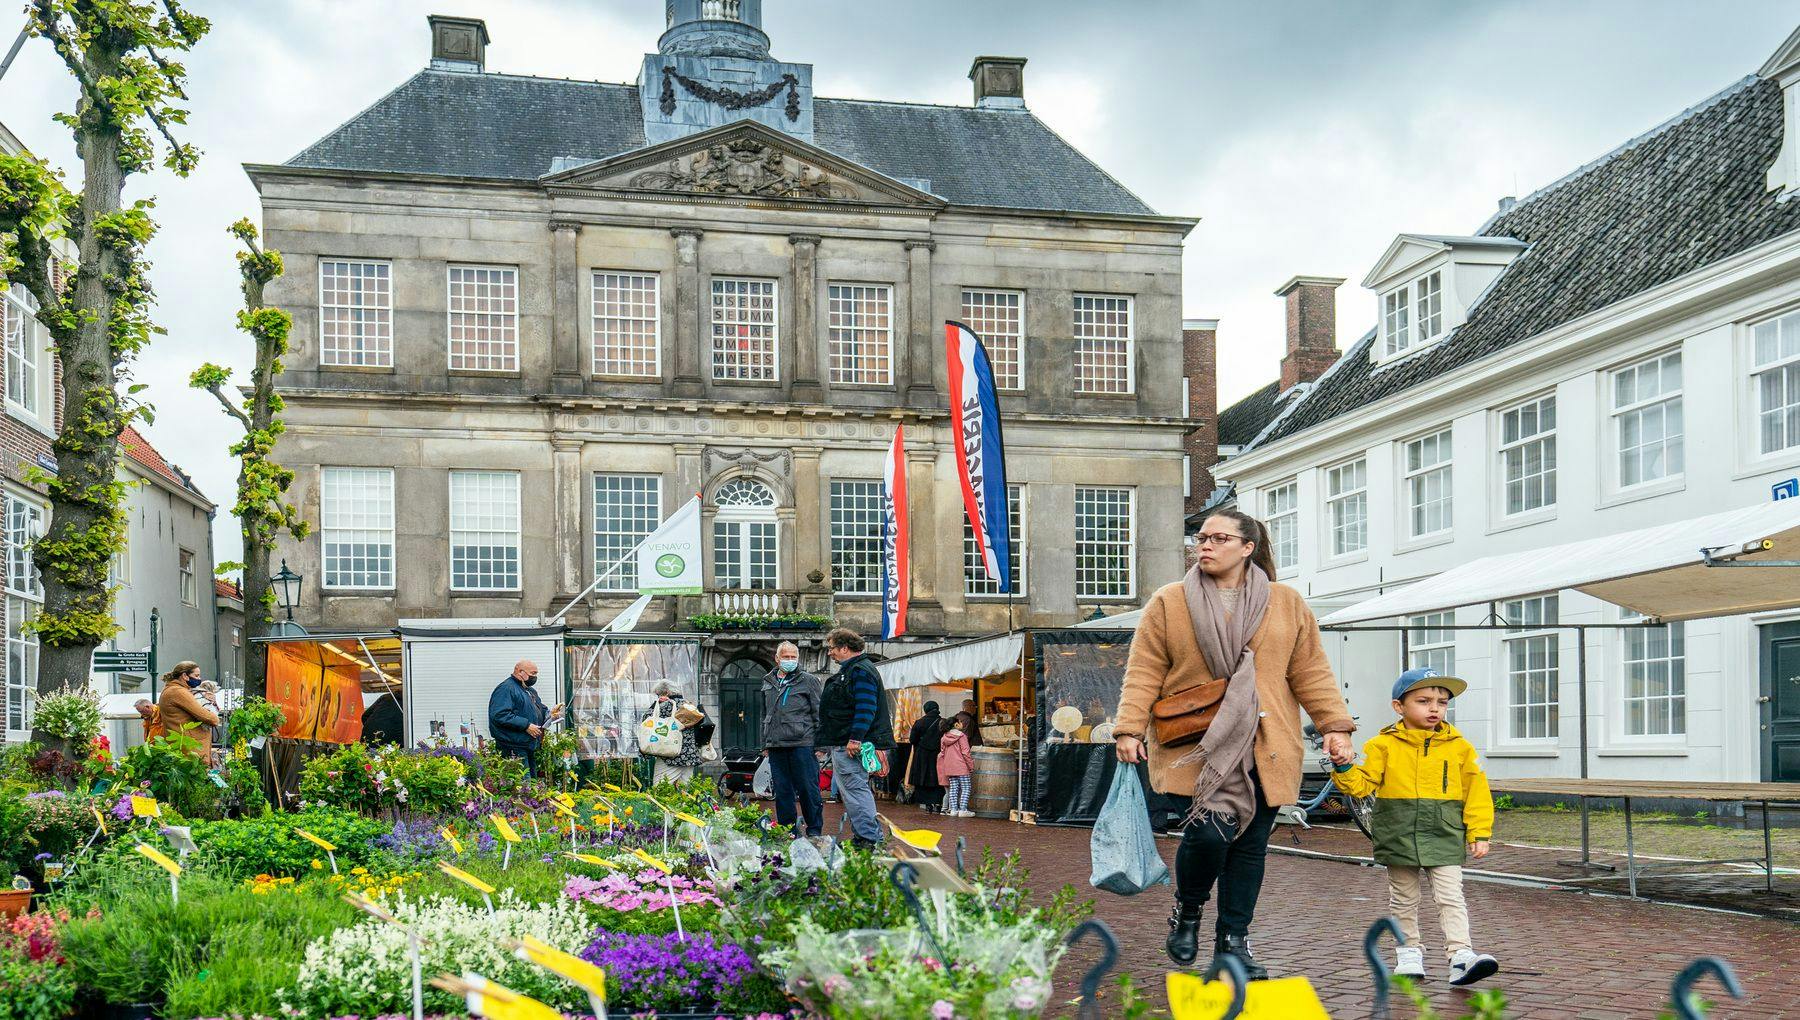 Spring Market at the Weesp city hall